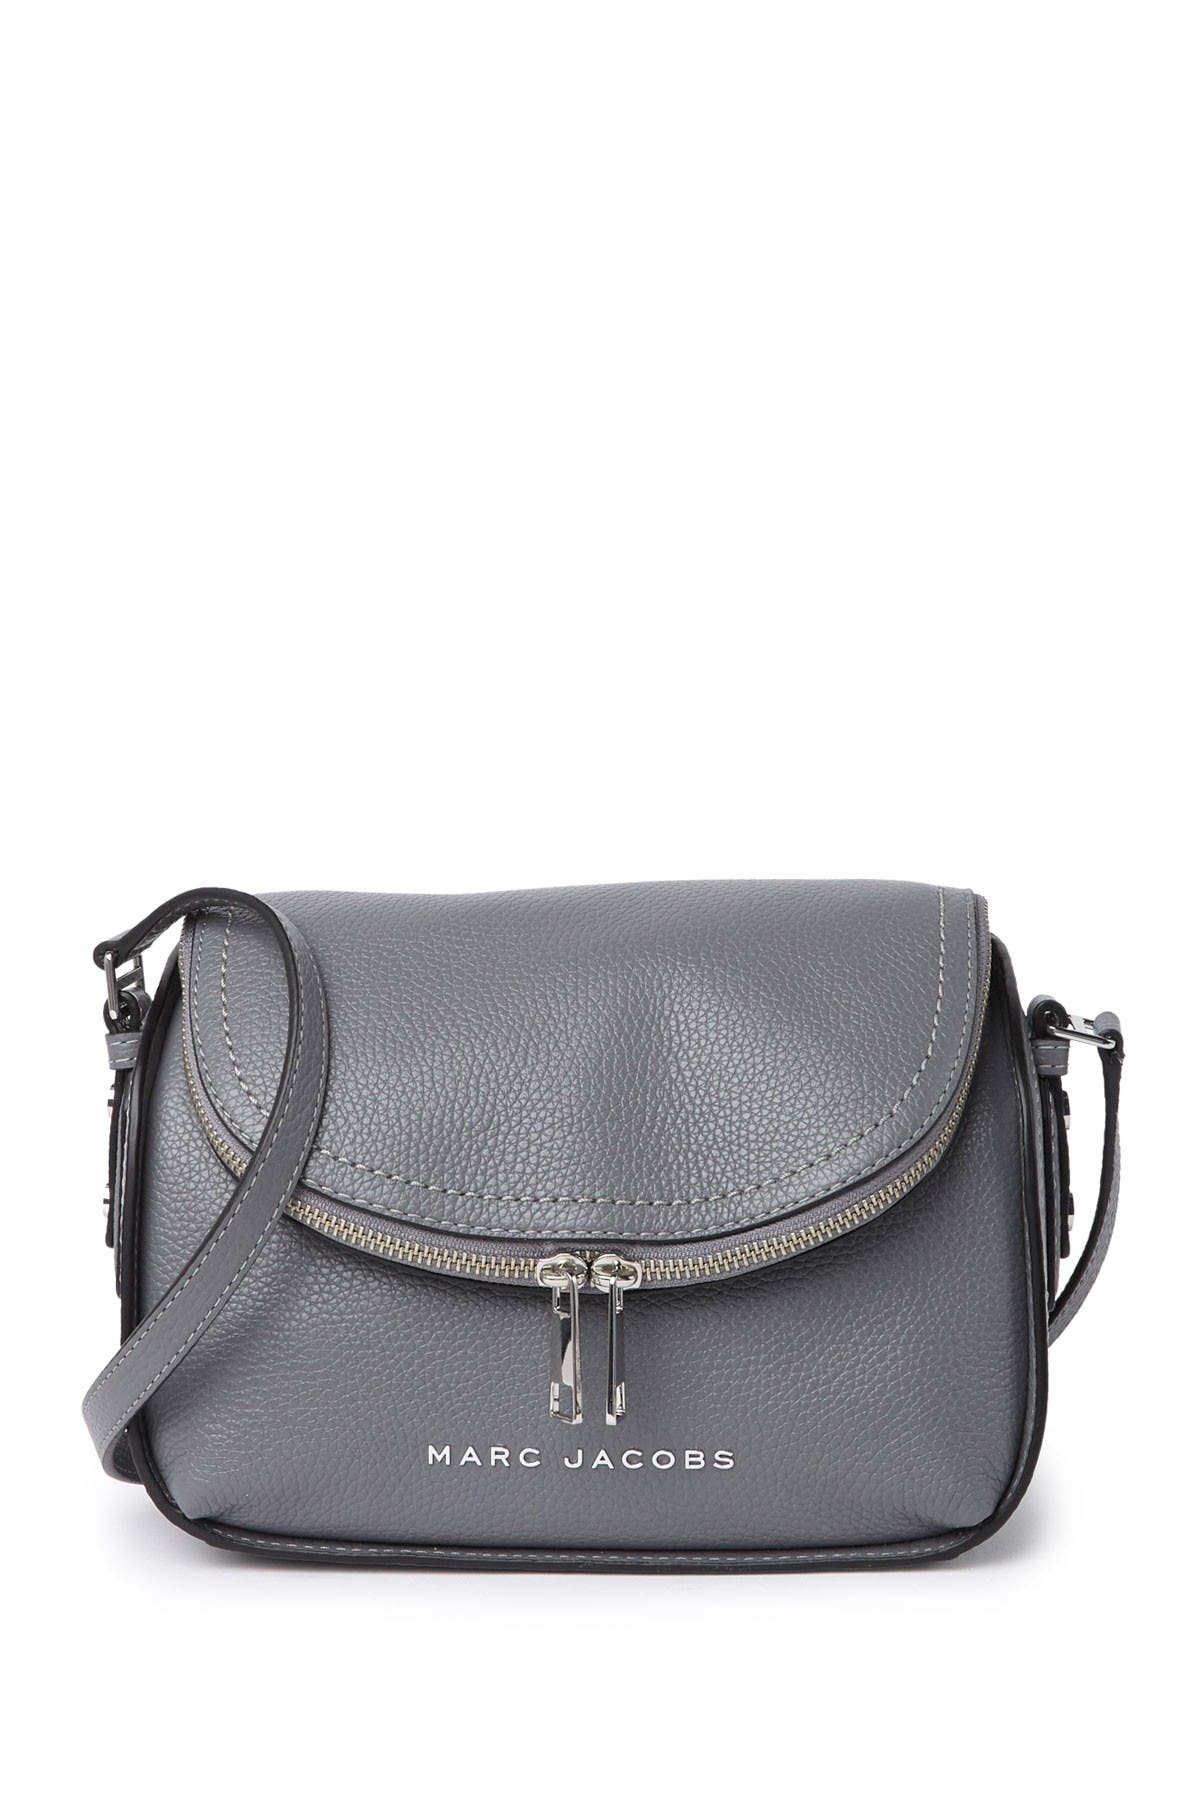 Marc Jacobs The Groove Leather Mini Messenger Bag In Stormy Weather